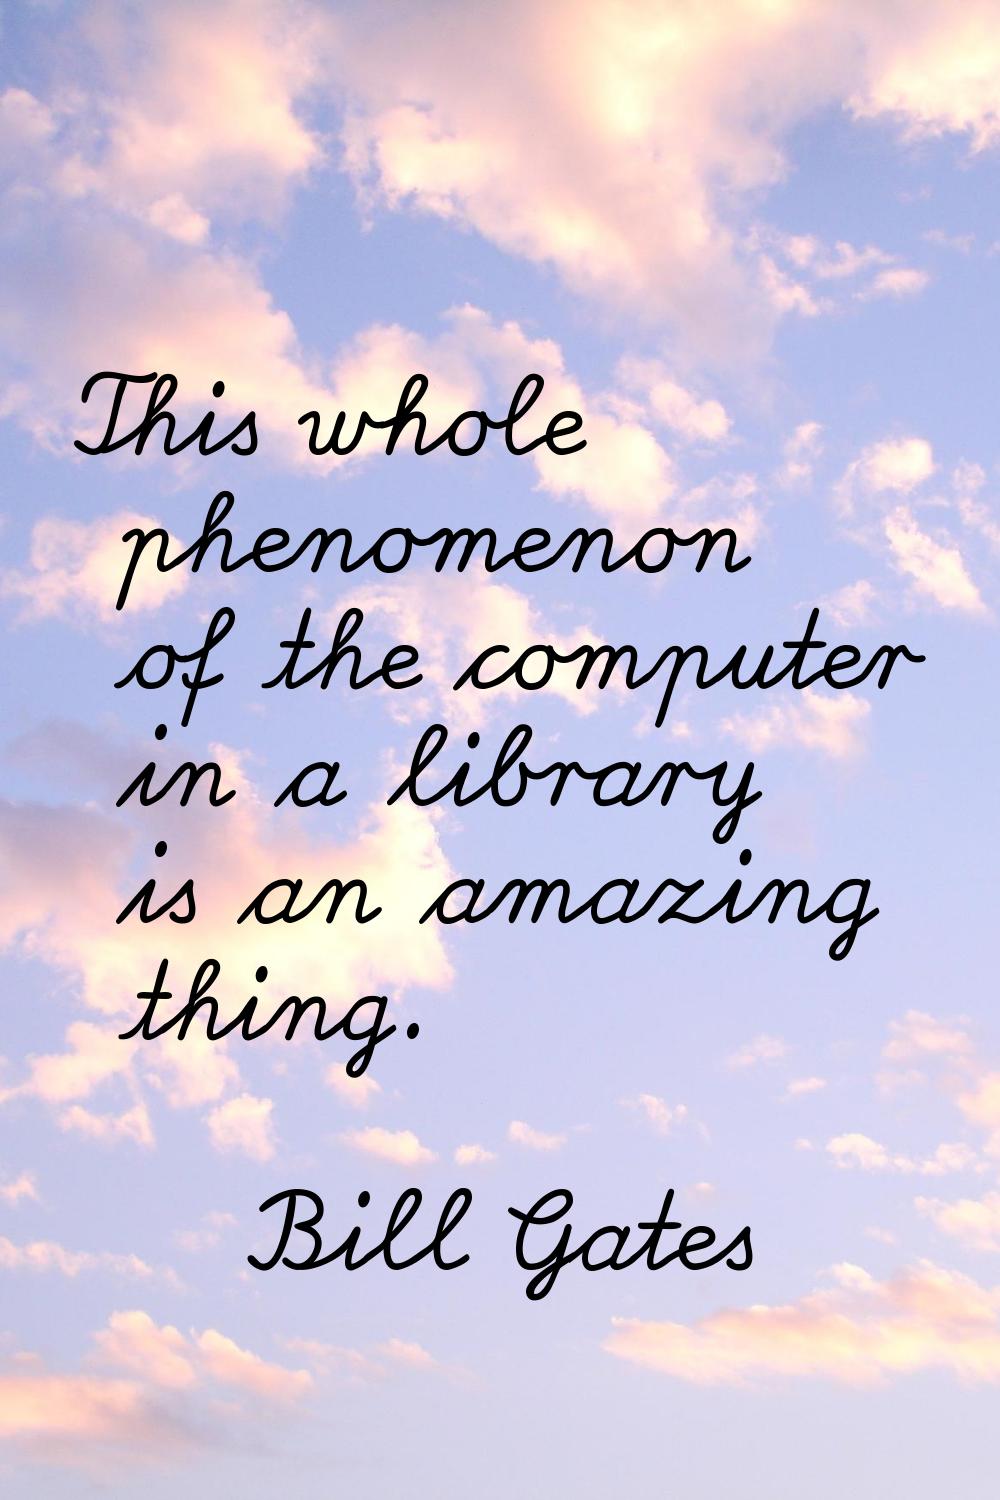 This whole phenomenon of the computer in a library is an amazing thing.